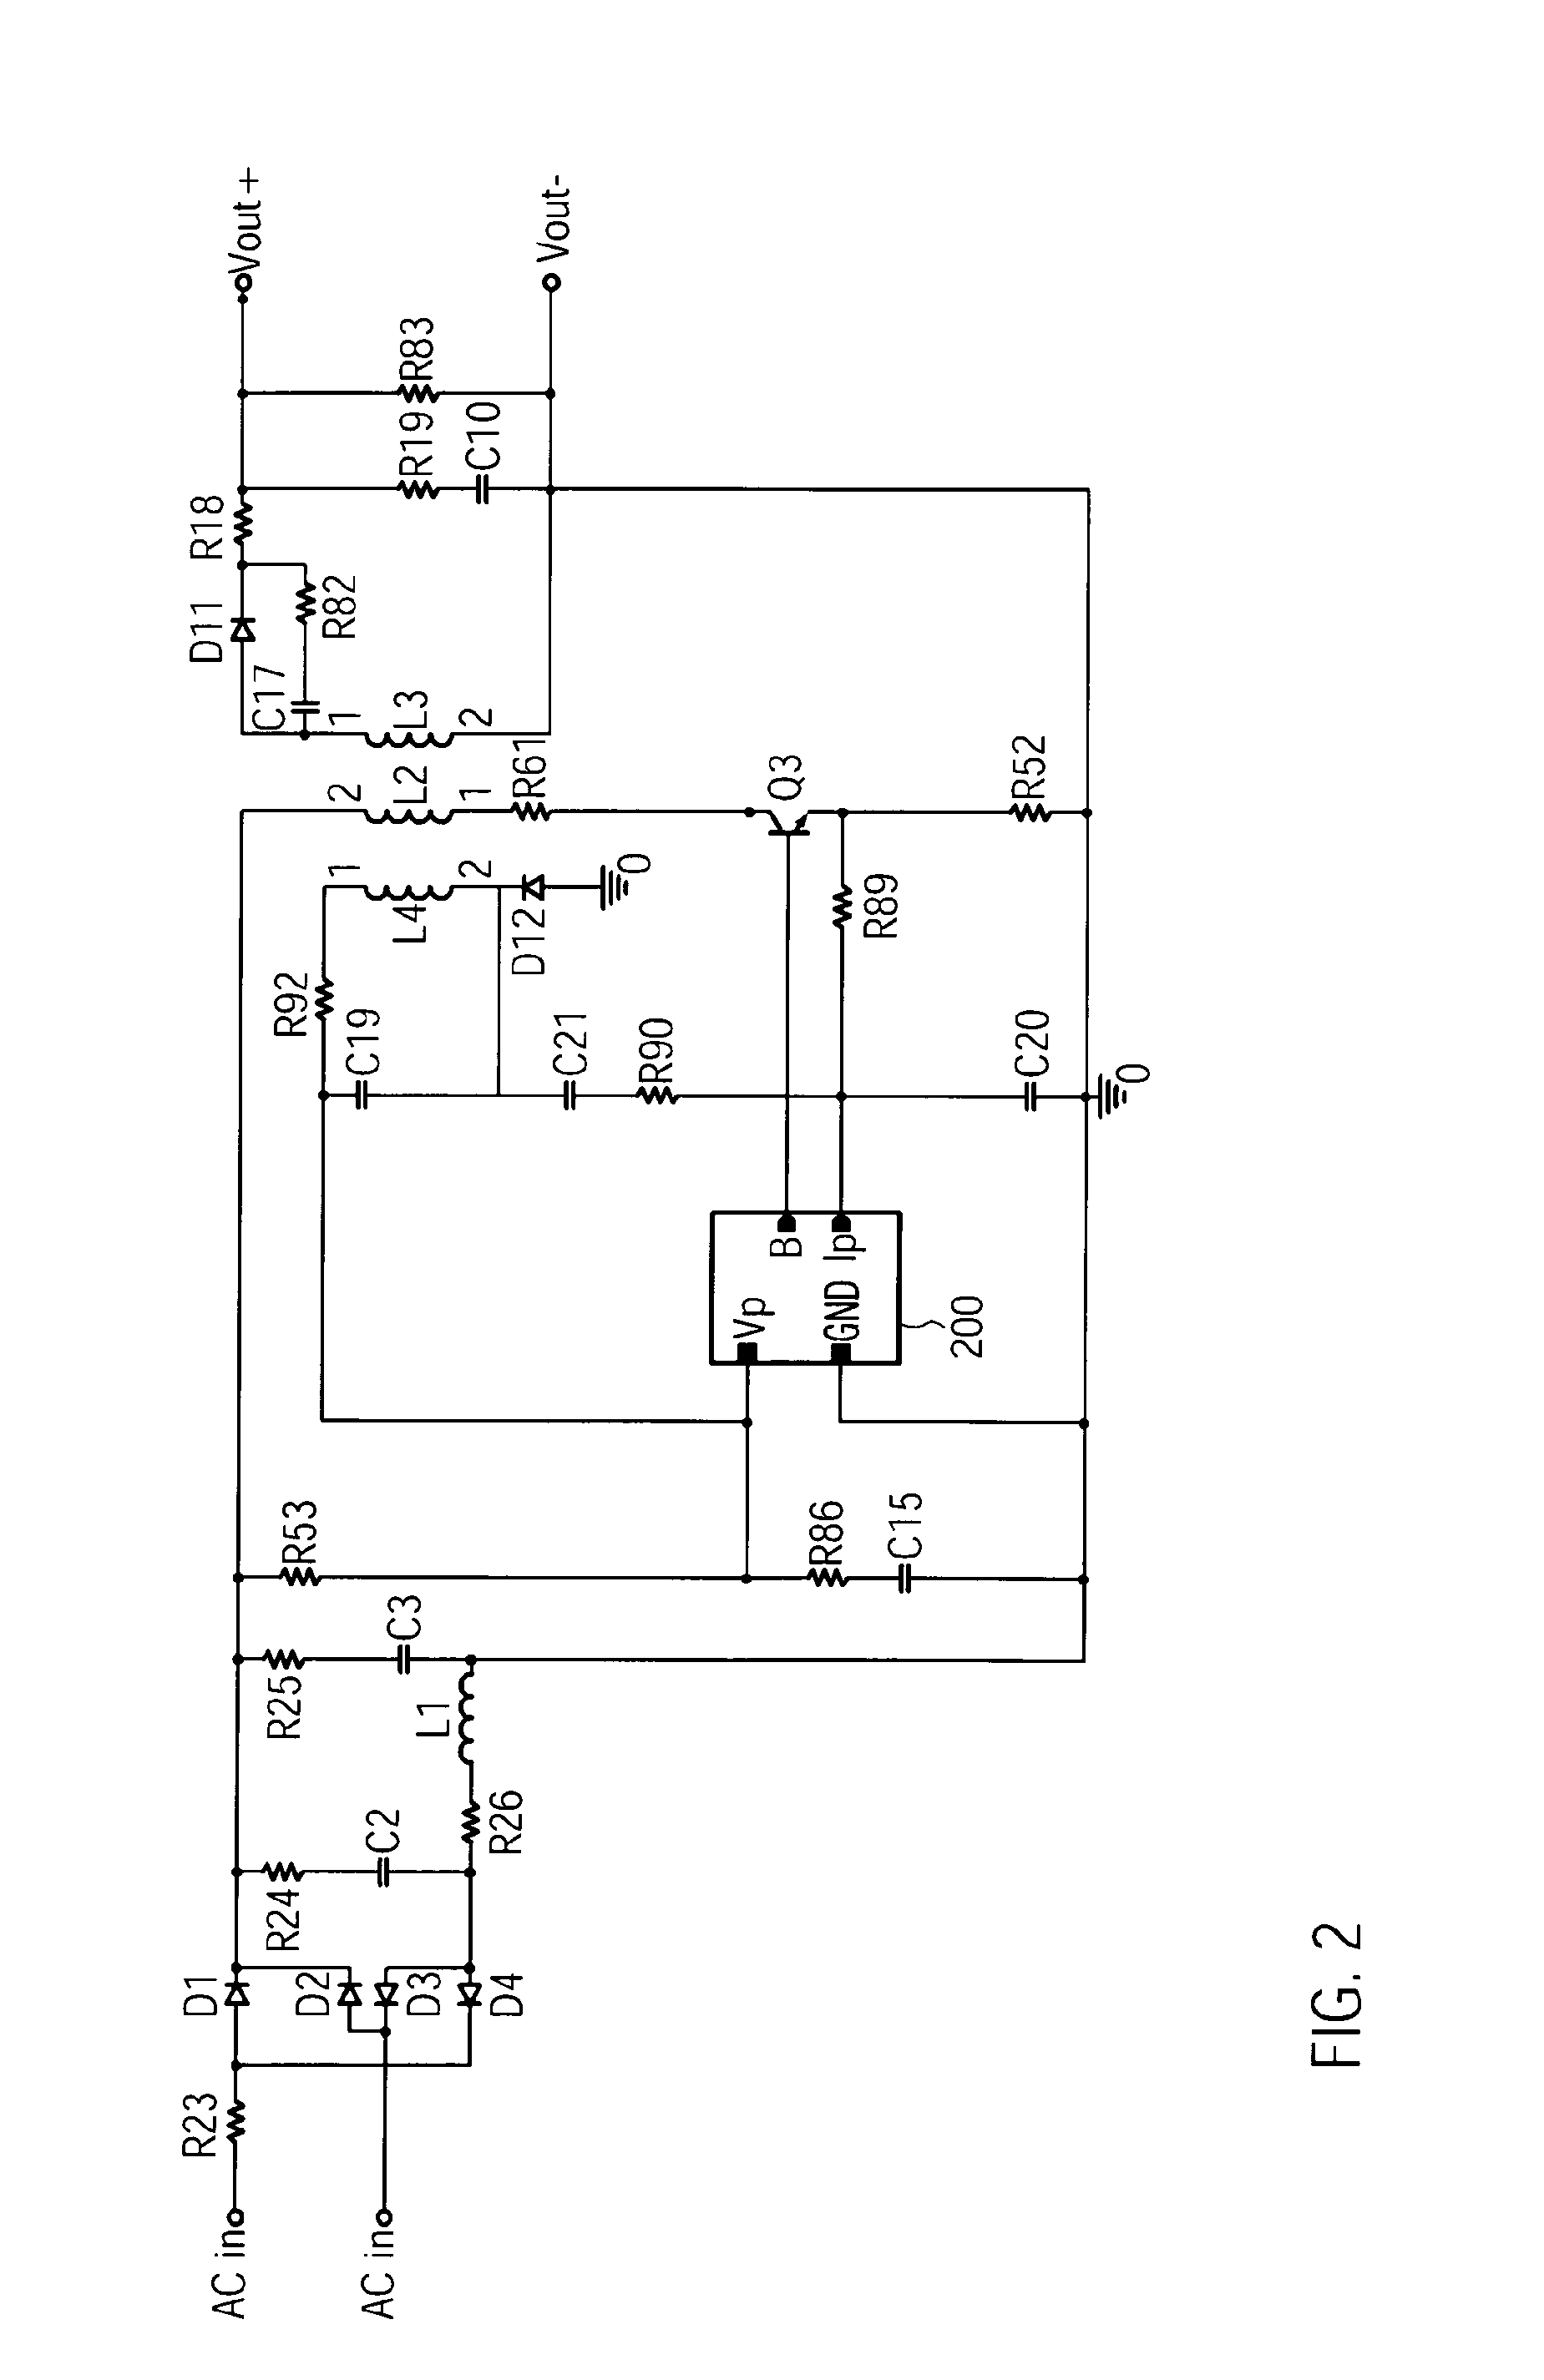 Simplified primary triggering circuit for the switch in a switched-mode power supply